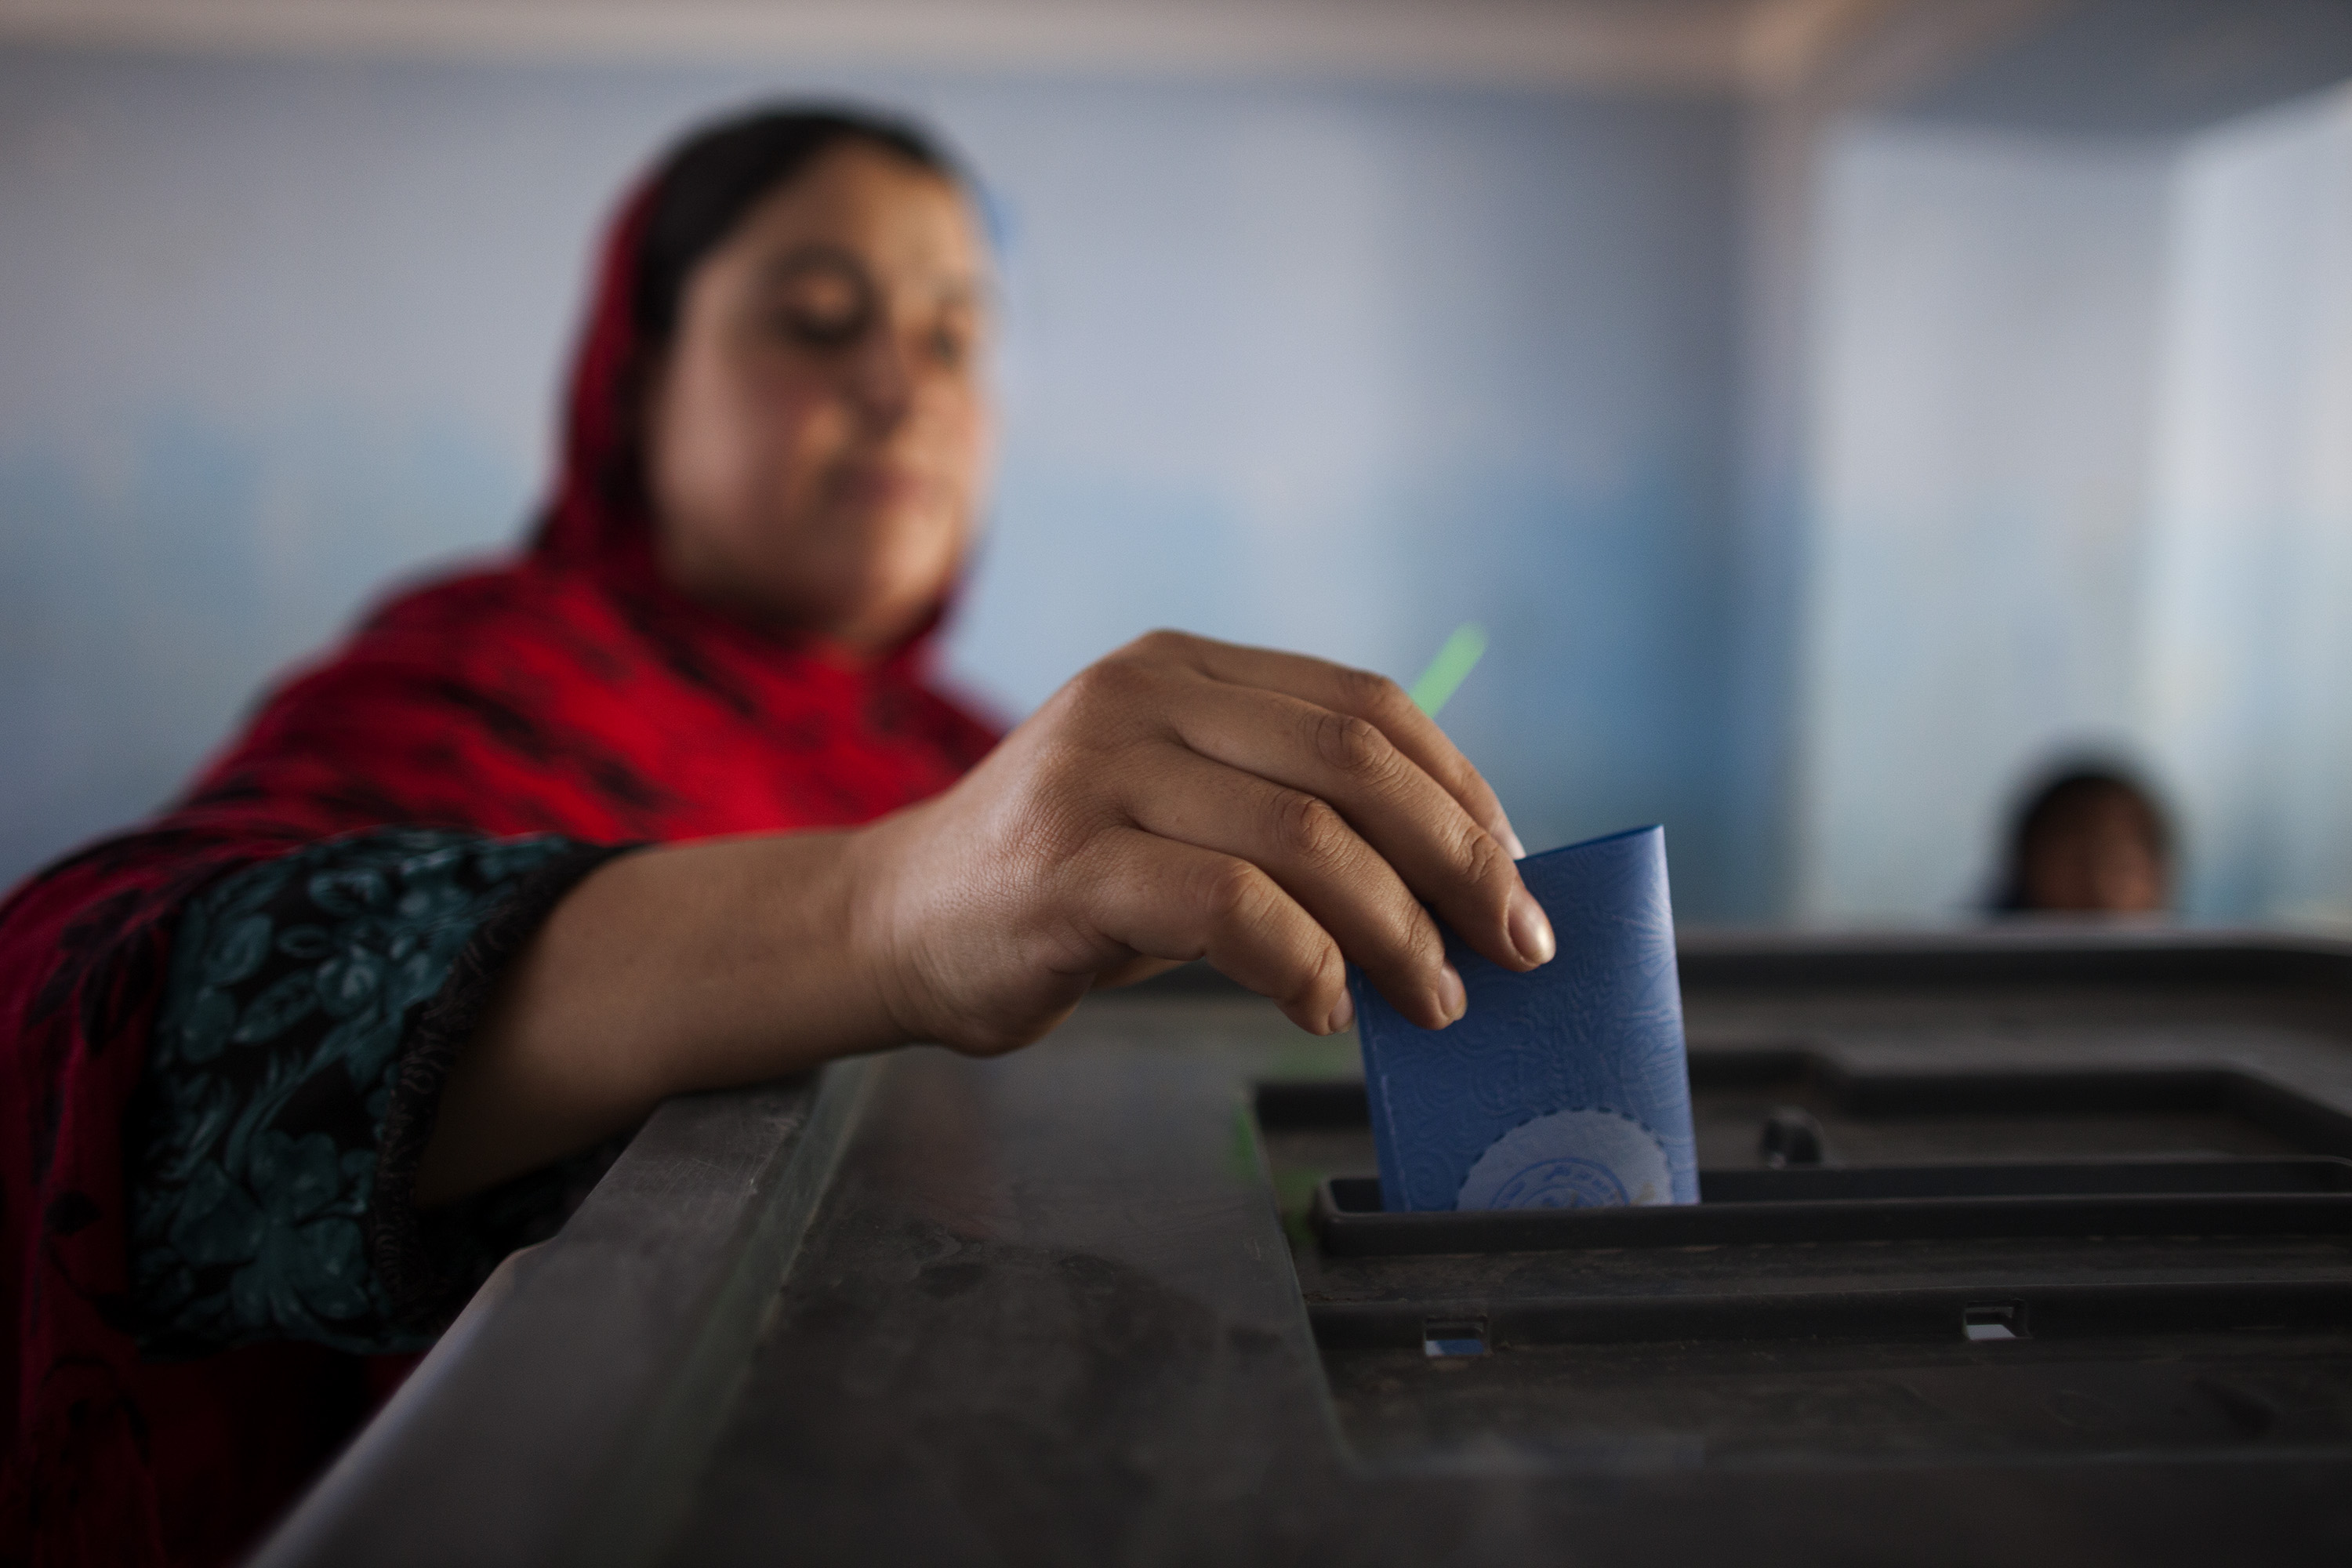 An Afghan woman casts her ballot during the second round for presidential election at a polling station in Kabul, Afghanistan, on June 14, 2014. (Majid Saeedi&mdash;Getty Images)